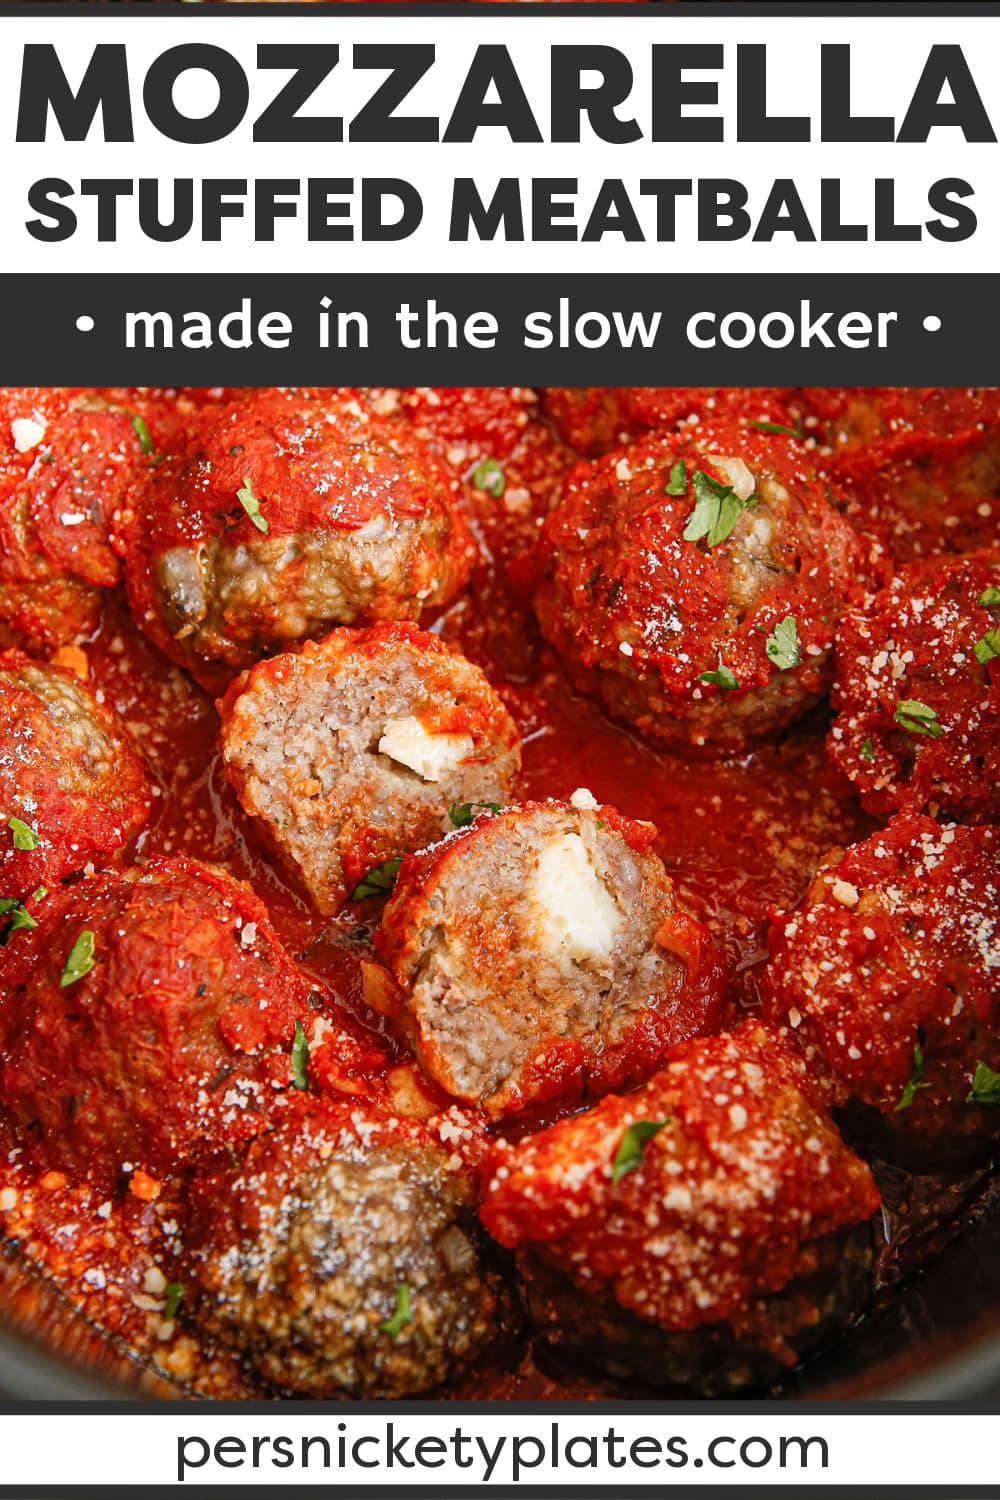 Easy and flavorful Slow Cooker Mozzarella Stuffed Meatballs are made with lean ground beef or turkey and stuffed with cheese. Served over zoodles, or your favorite noodle, this is a healthy and delicious recipe made right in your crockpot! | www.persnicketyplates.com